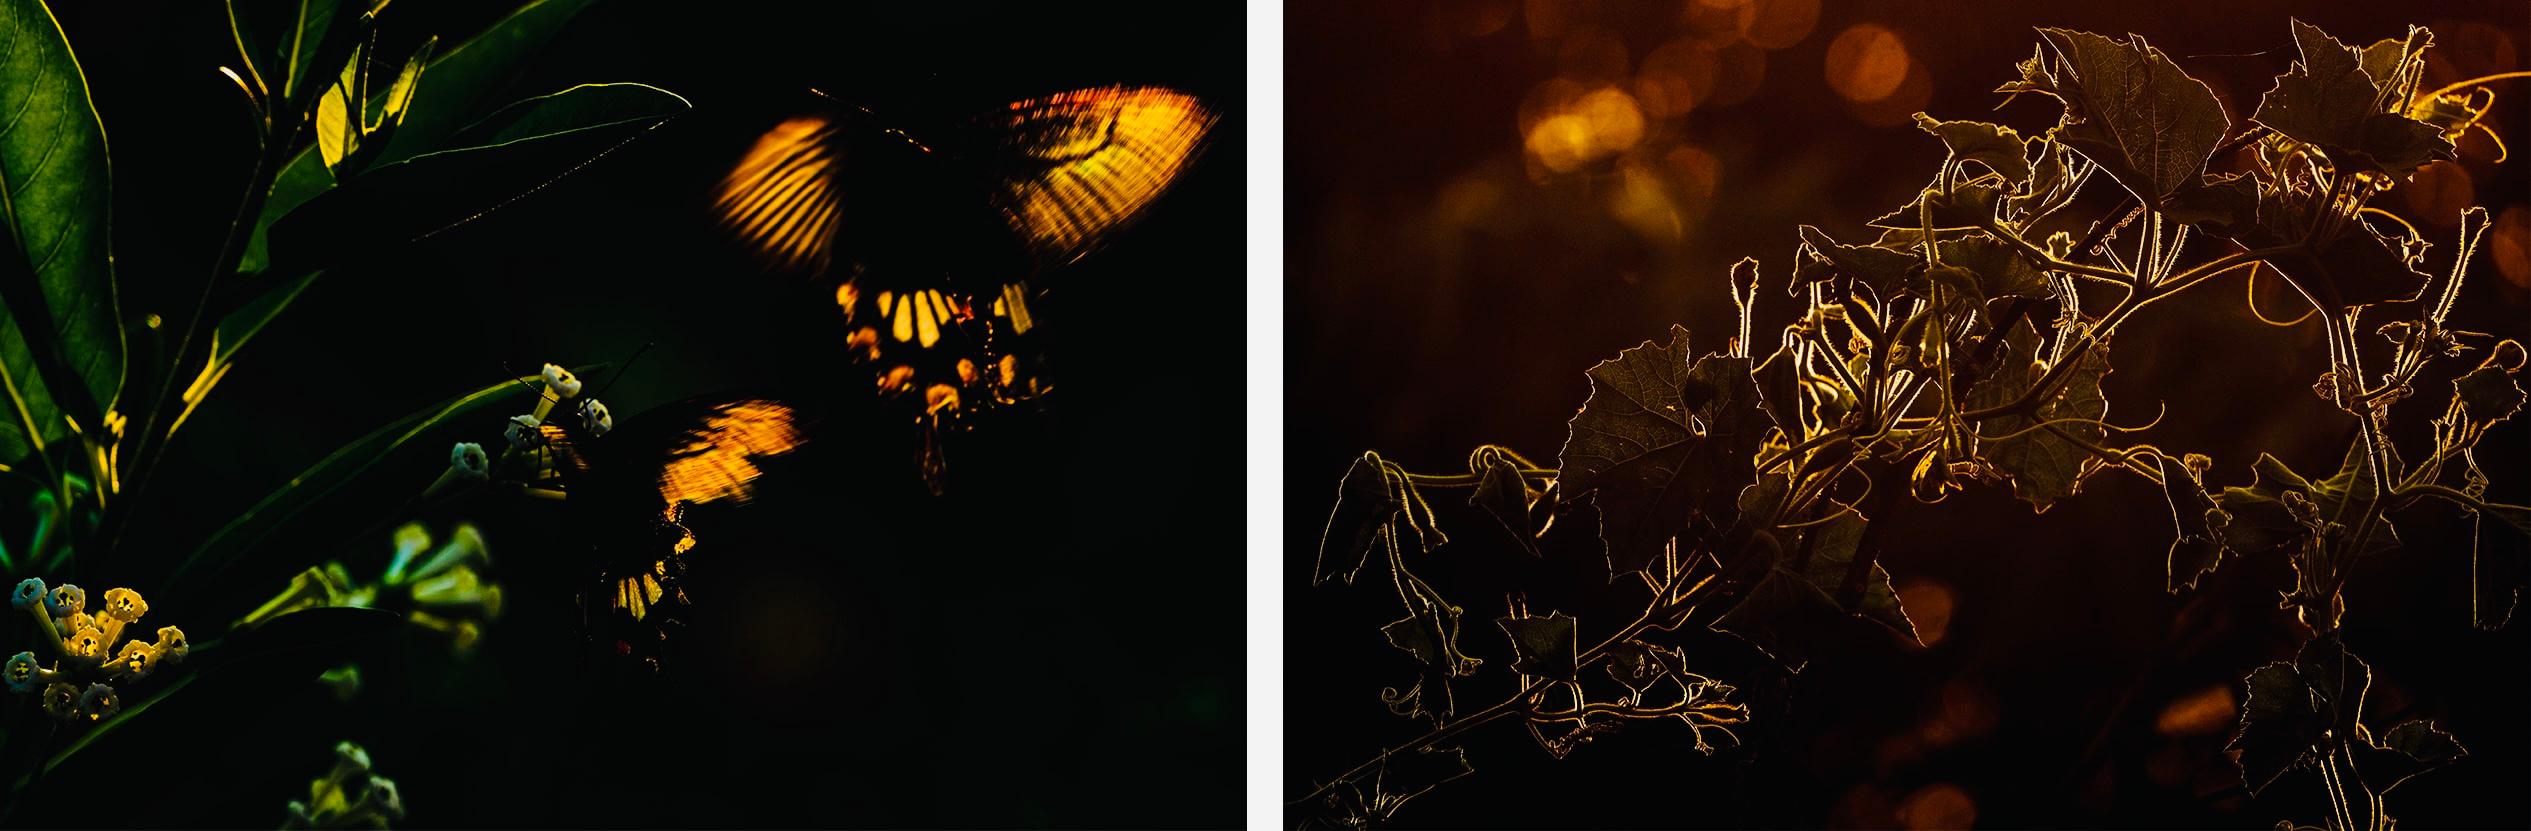 Aditya Dicky Singh,  Untitled diptych, photograph on fine-art Hahnemuhle archival paper  
Two photographic works, each photograph 44 x 65" unframed (91cm x 135cm). Total size 44" x 130" ( 91cm x 170cm),  2022
*Please note the sizes above are the